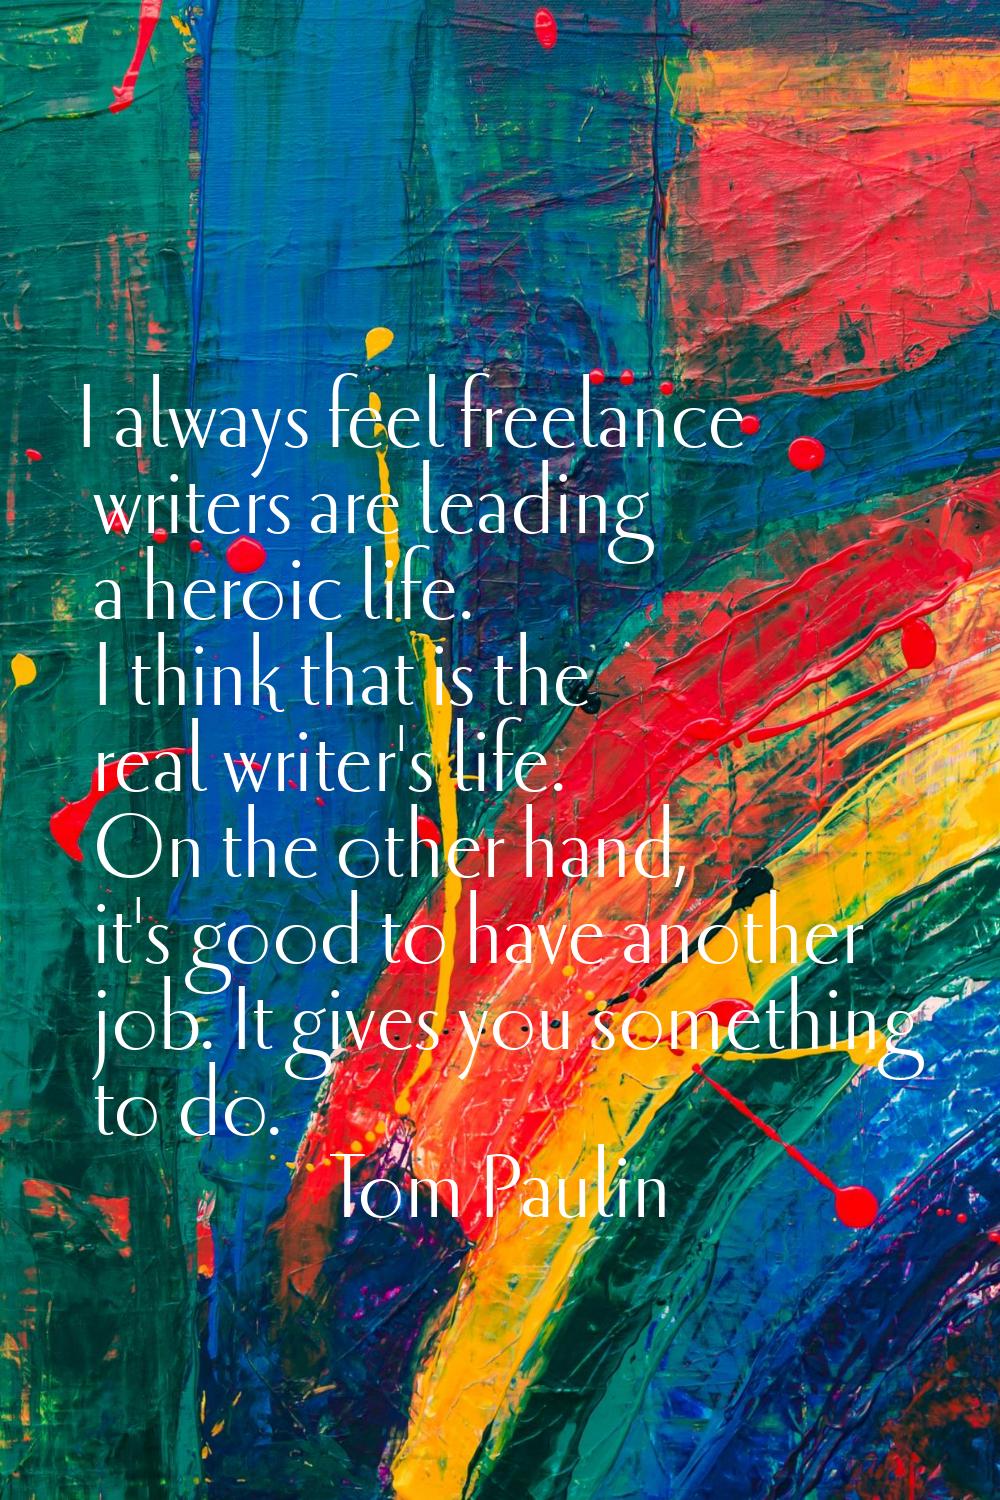 I always feel freelance writers are leading a heroic life. I think that is the real writer's life. 